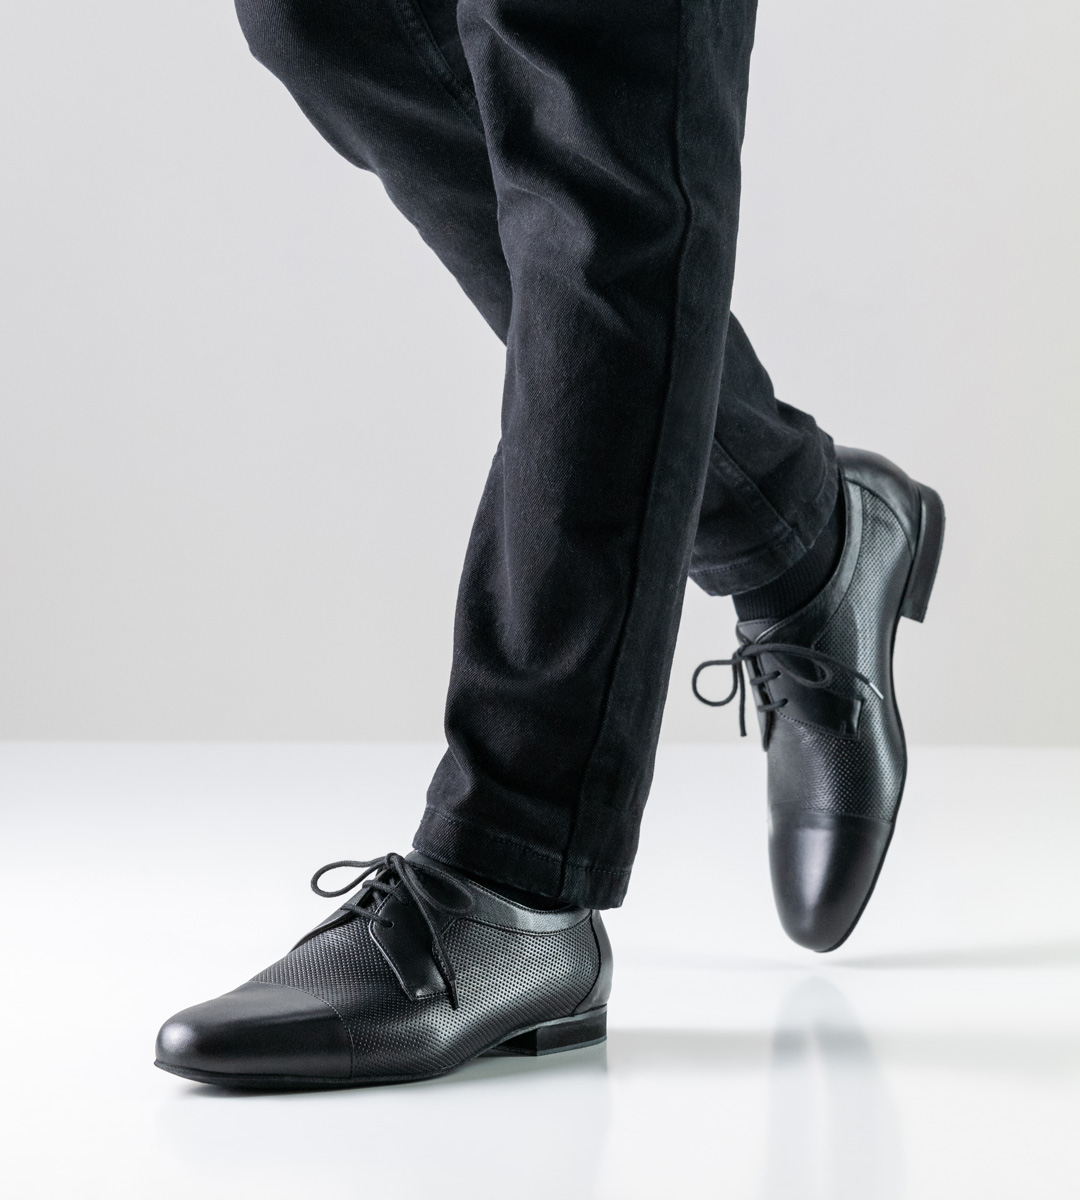 Men's dance shoe in black to lace up in combination with black trousers